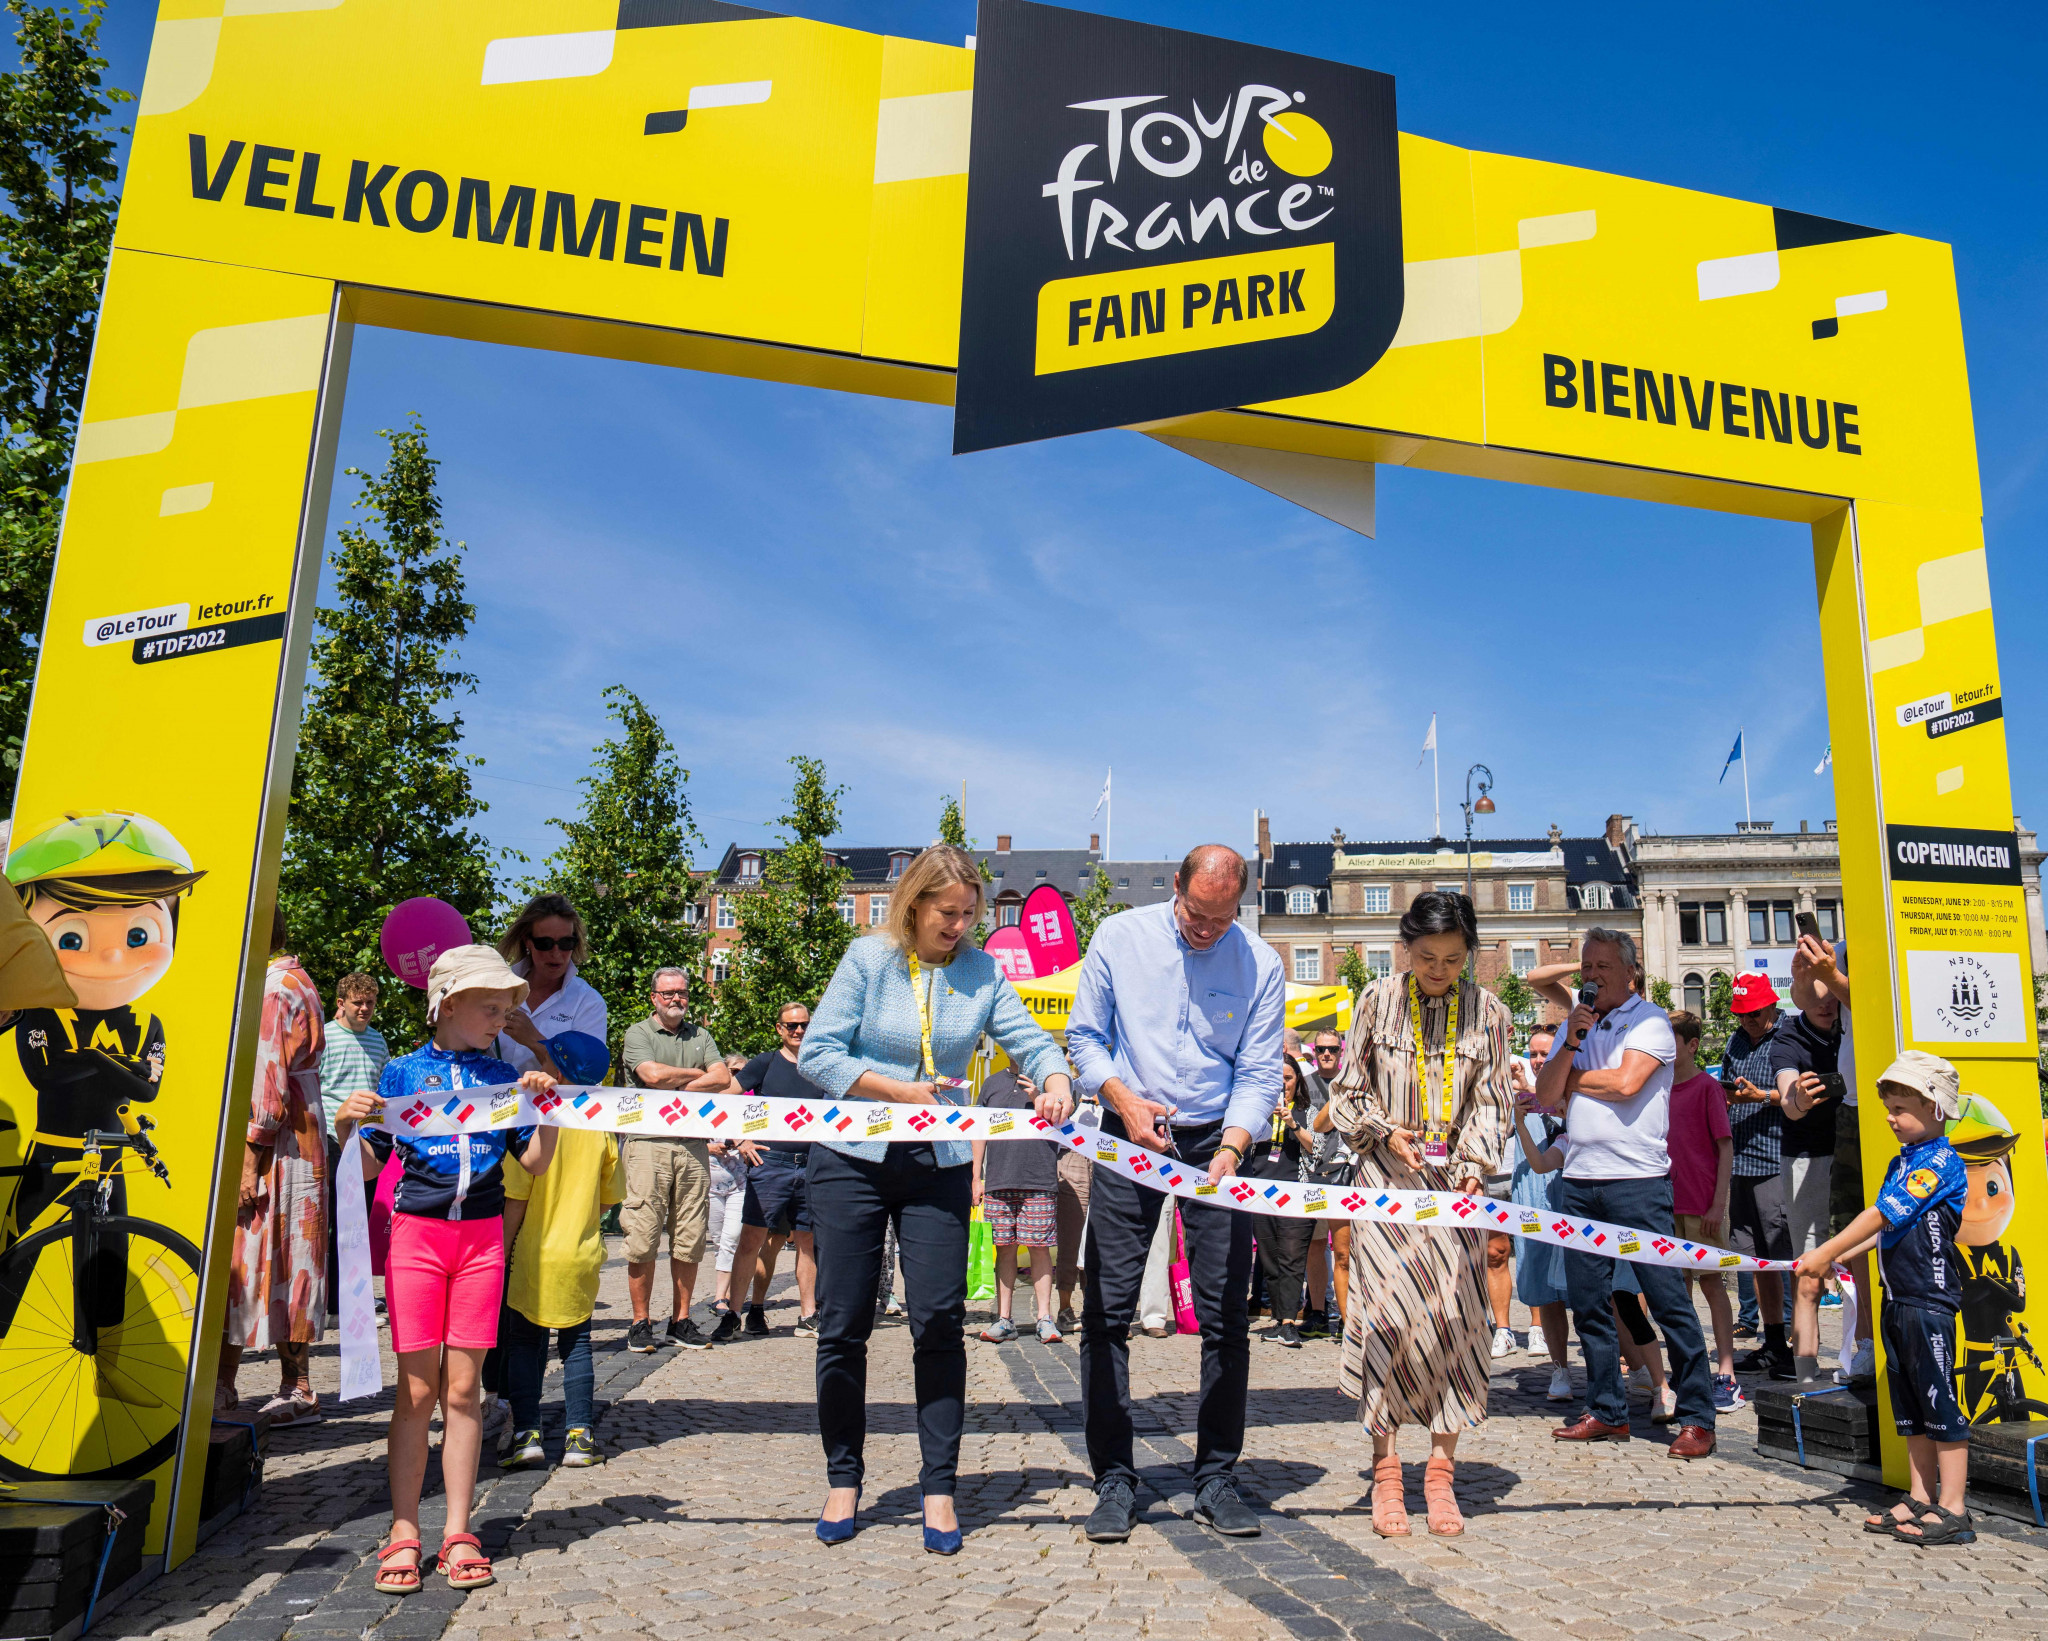 Lord Mayor of Copenhagen Sophie Hæstorp Andersen joins Tour de France general director Christian Prudhomme in cutting the ribbon to open the new fan park for the Grand Départ ©Getty Images